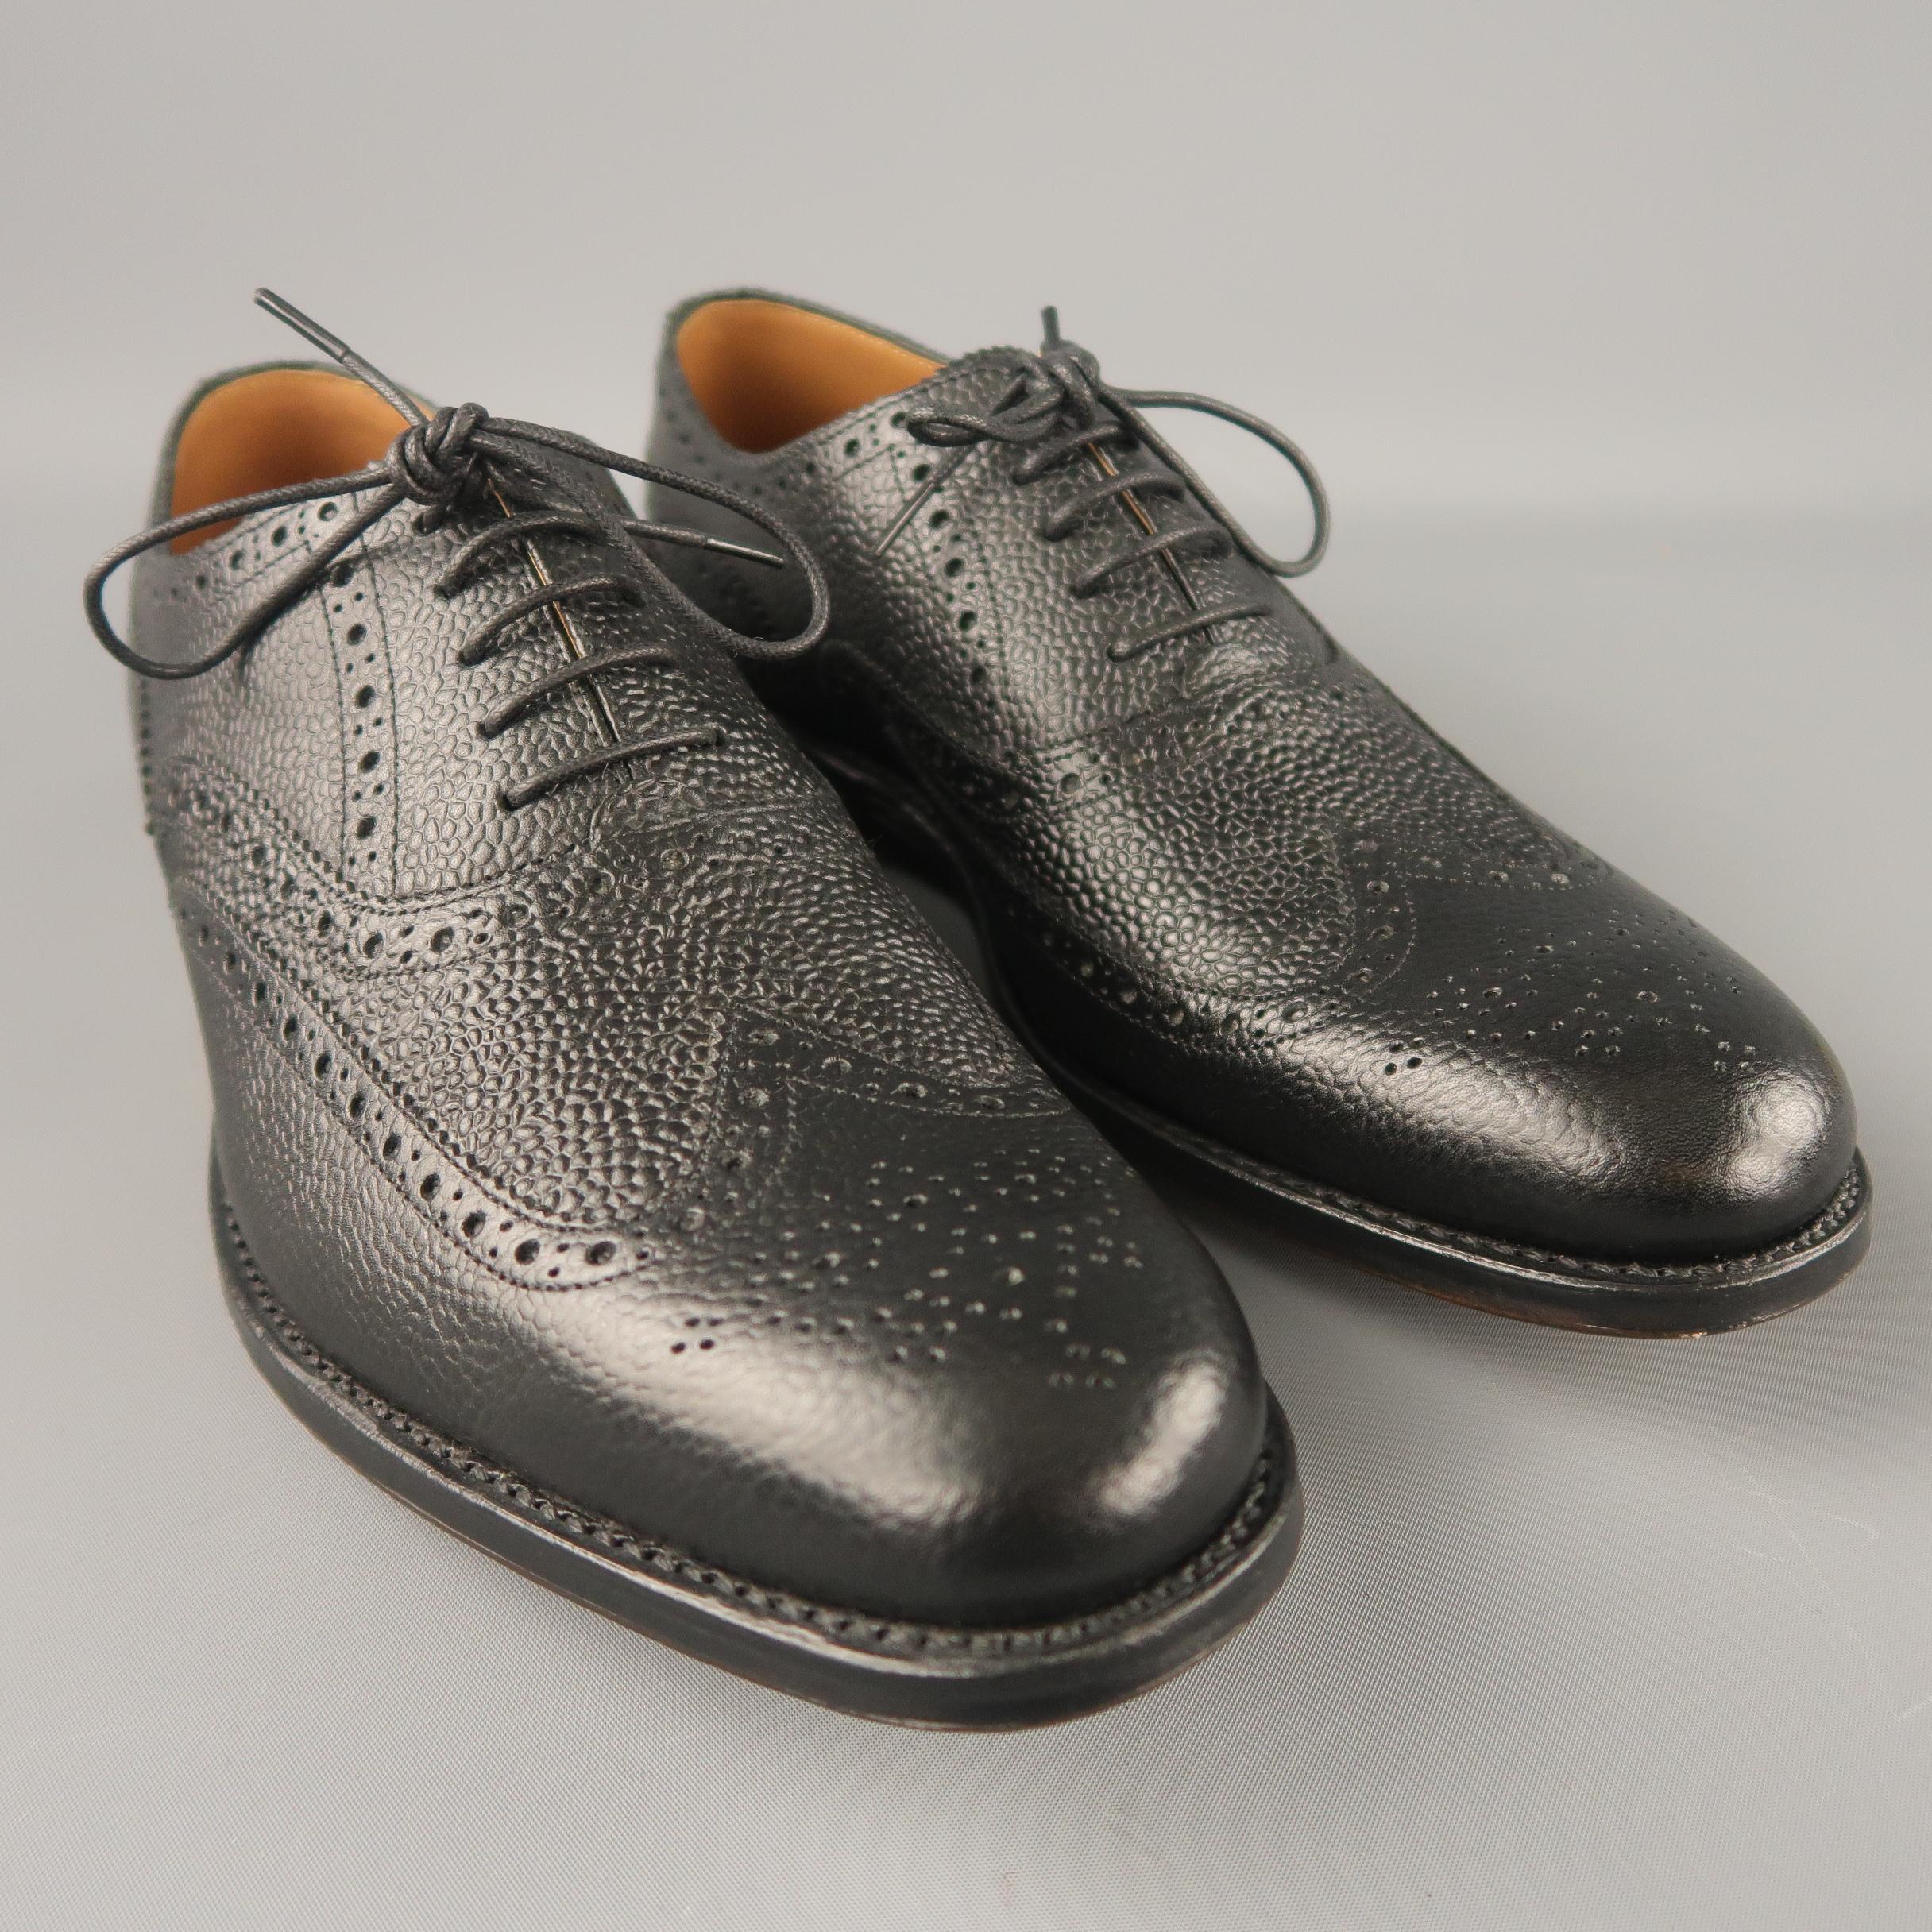 GRENSON wingtip shoes comes in a black leather perforated pattern featuring a wooden heel sole.
 
Brand New.
Marked: 7 E
 
Measurements:
 
Width: 4.4 in.
Length: 12 in.